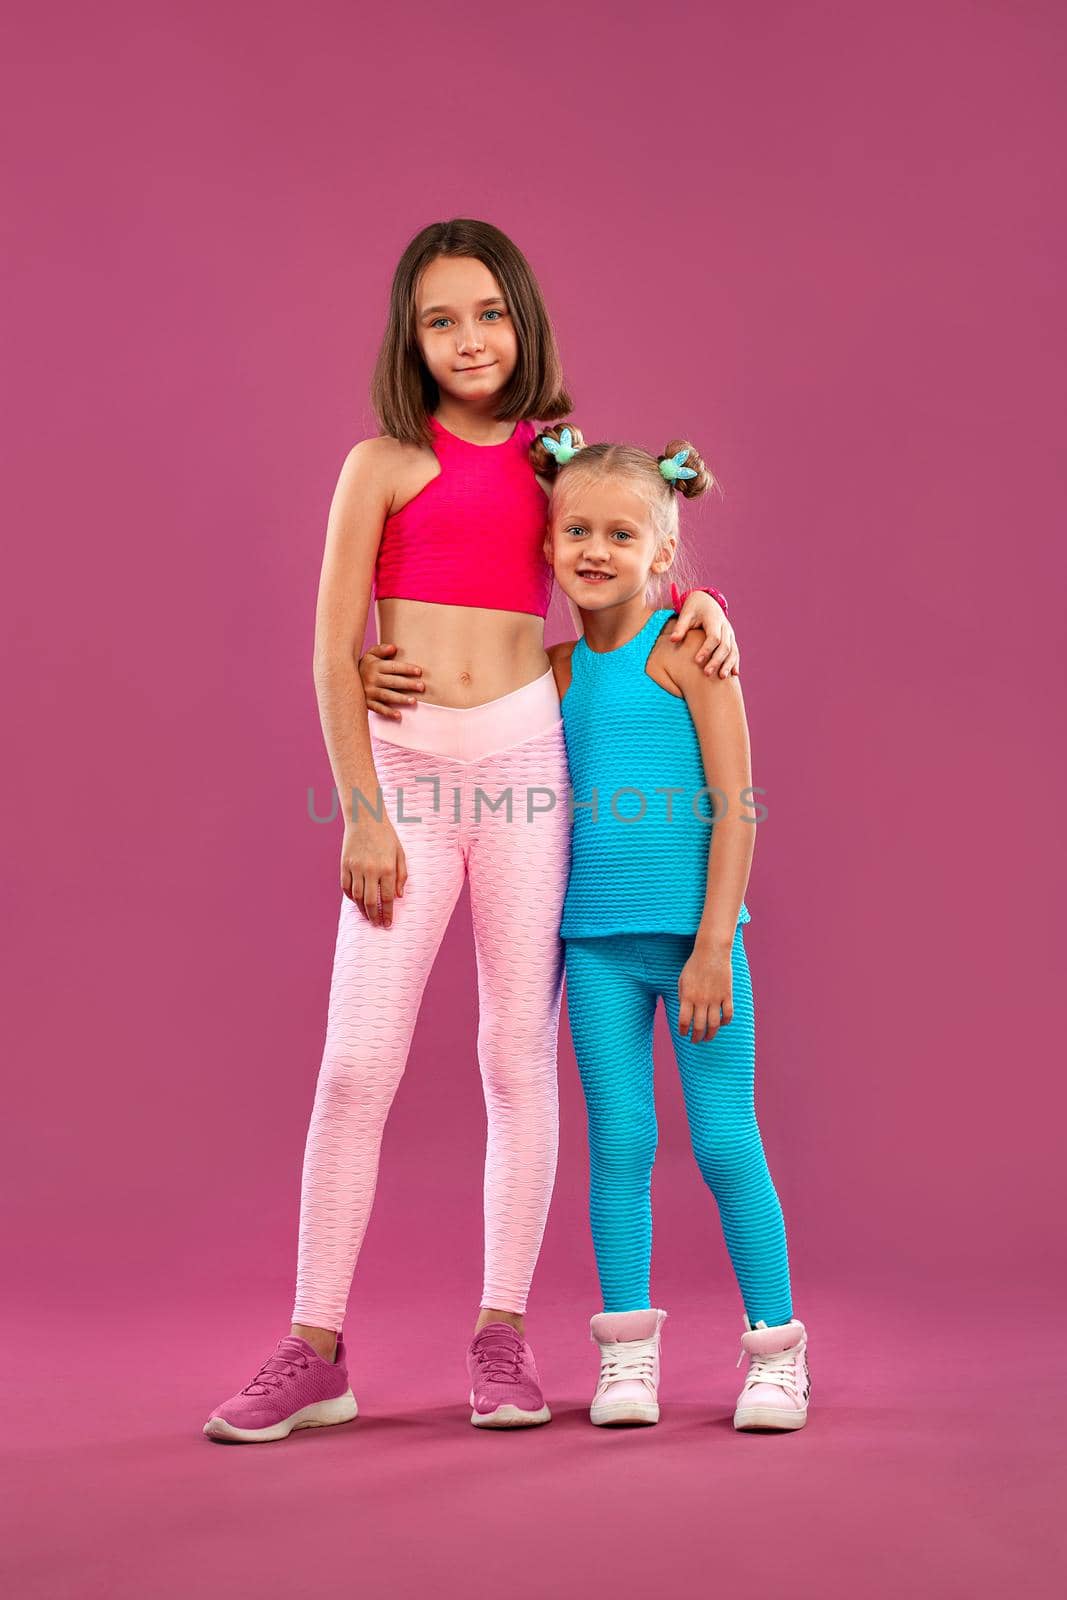 Two children girls listen to music on a pink background. Kids lifestyle concept. Sportswear for kids.